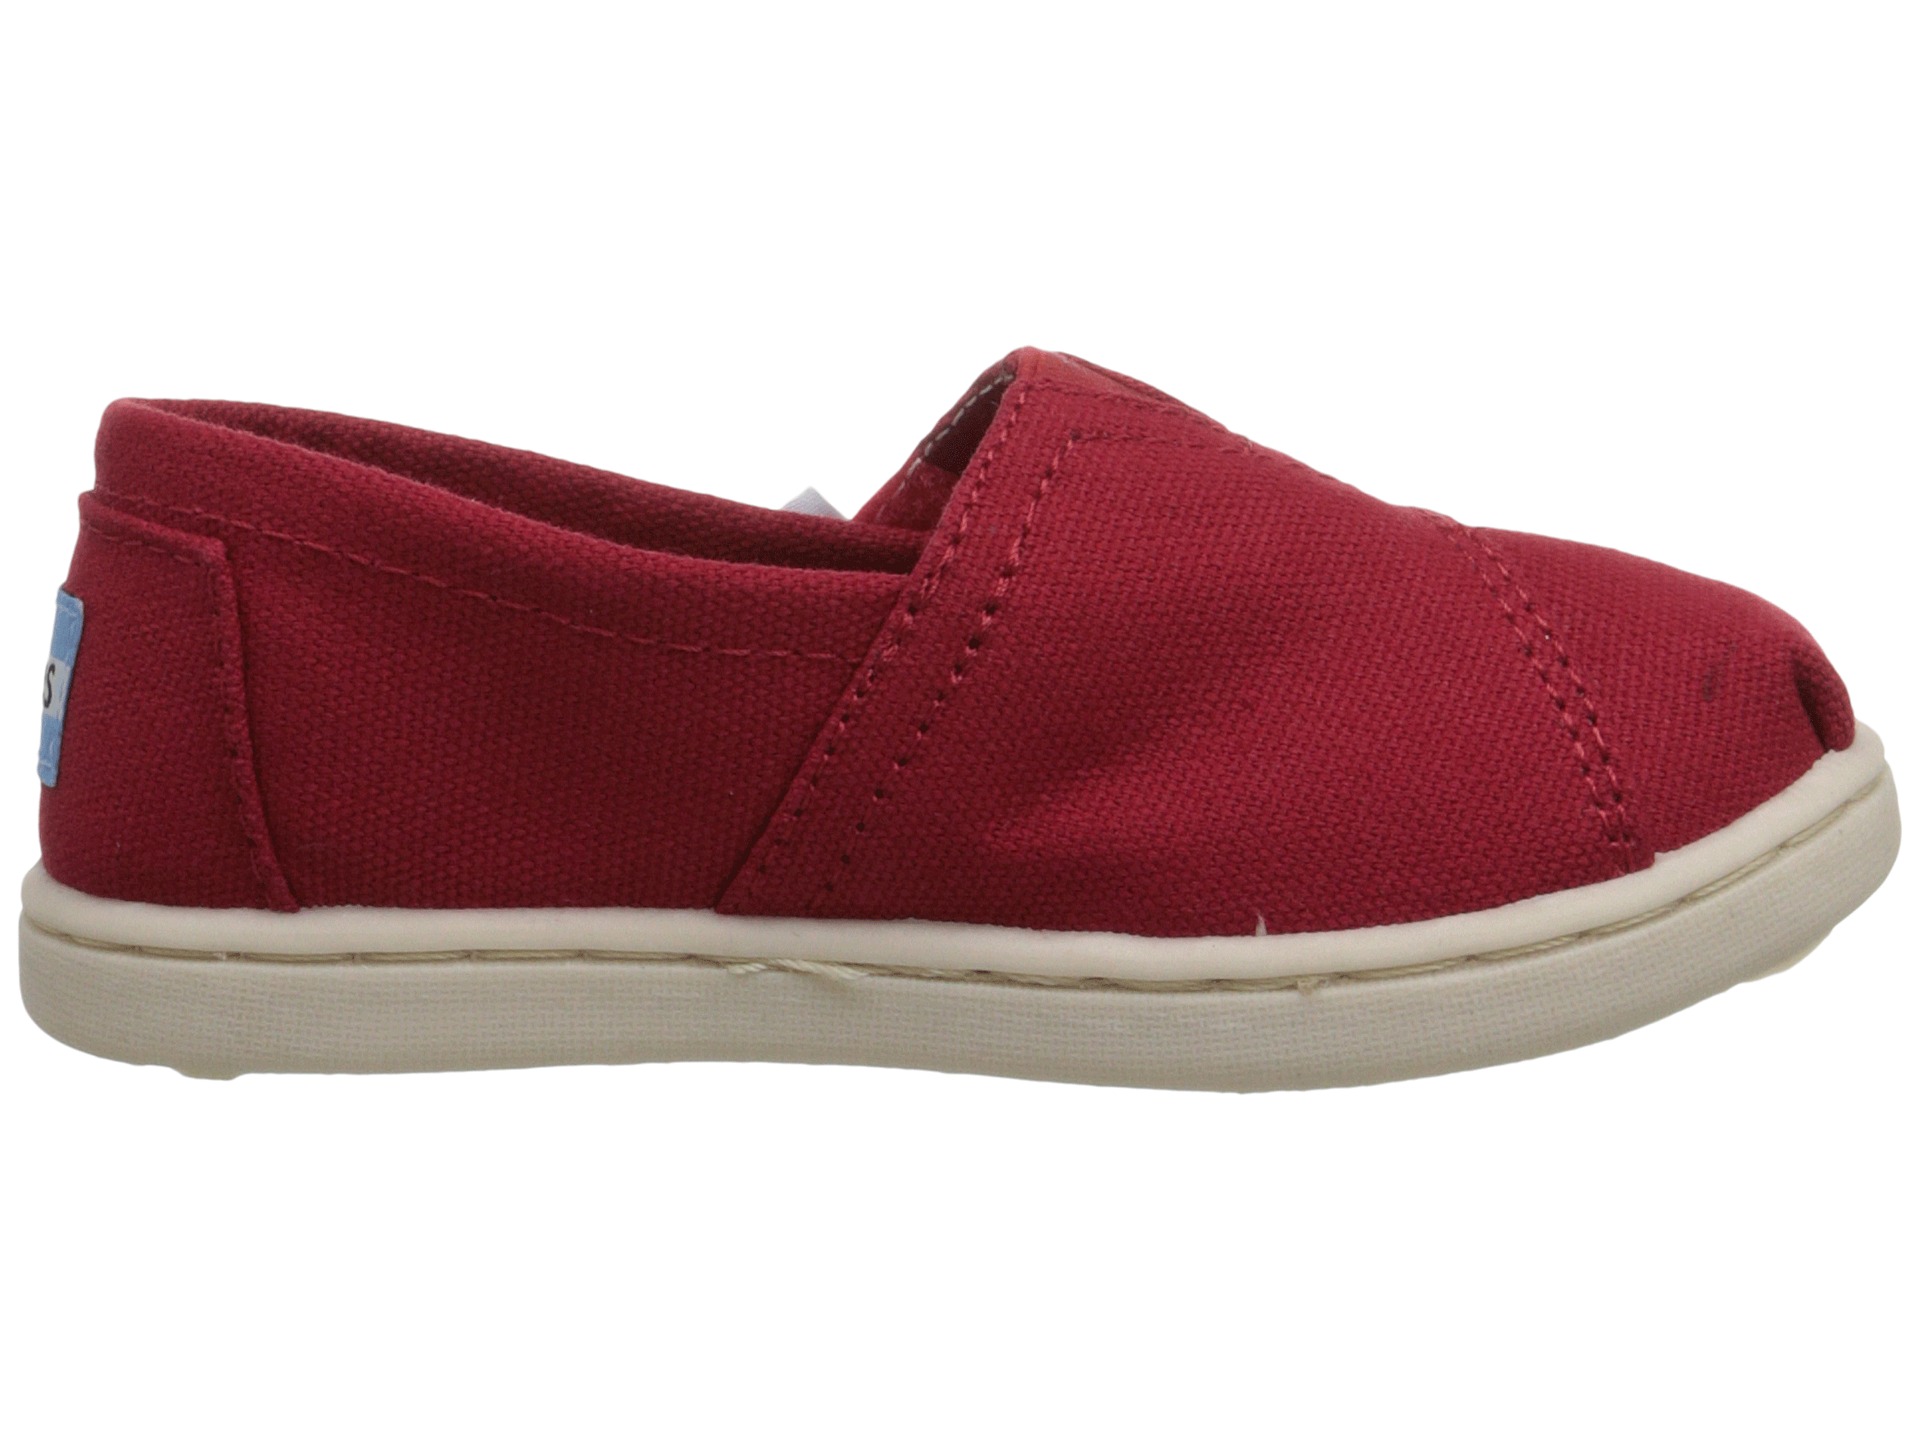 TOMS Kids Classics (Infant/Toddler/Little Kid) Red - Zappos.com Free ...